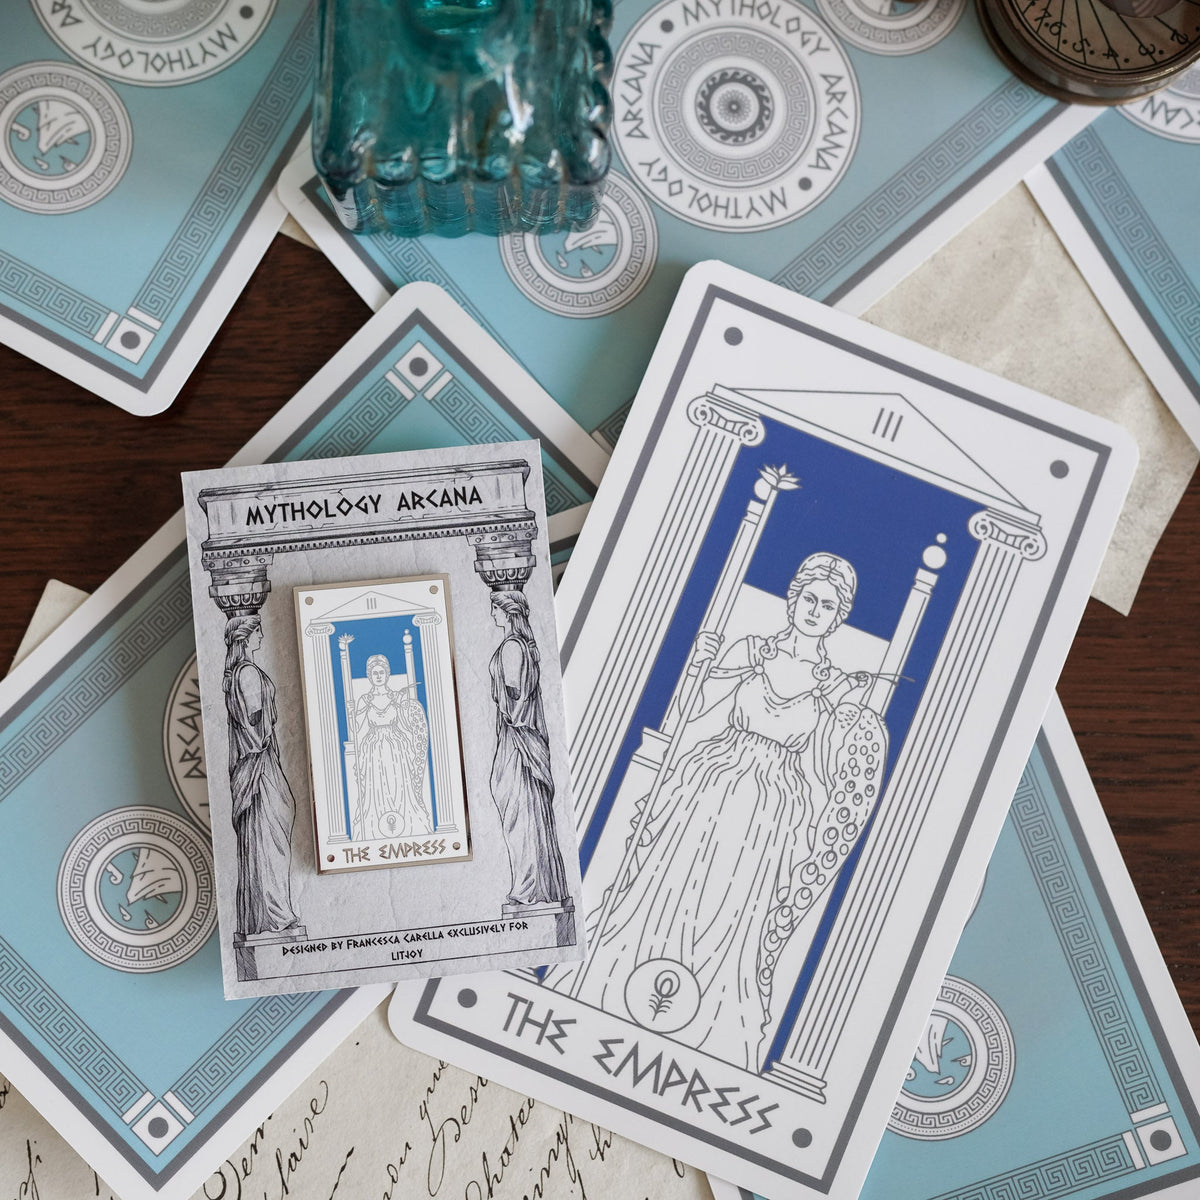 Hera The Empress, Mythology Tarot Enamel Pin with Hera sitting on a throne between two columns and words &quot;The Empress” below.